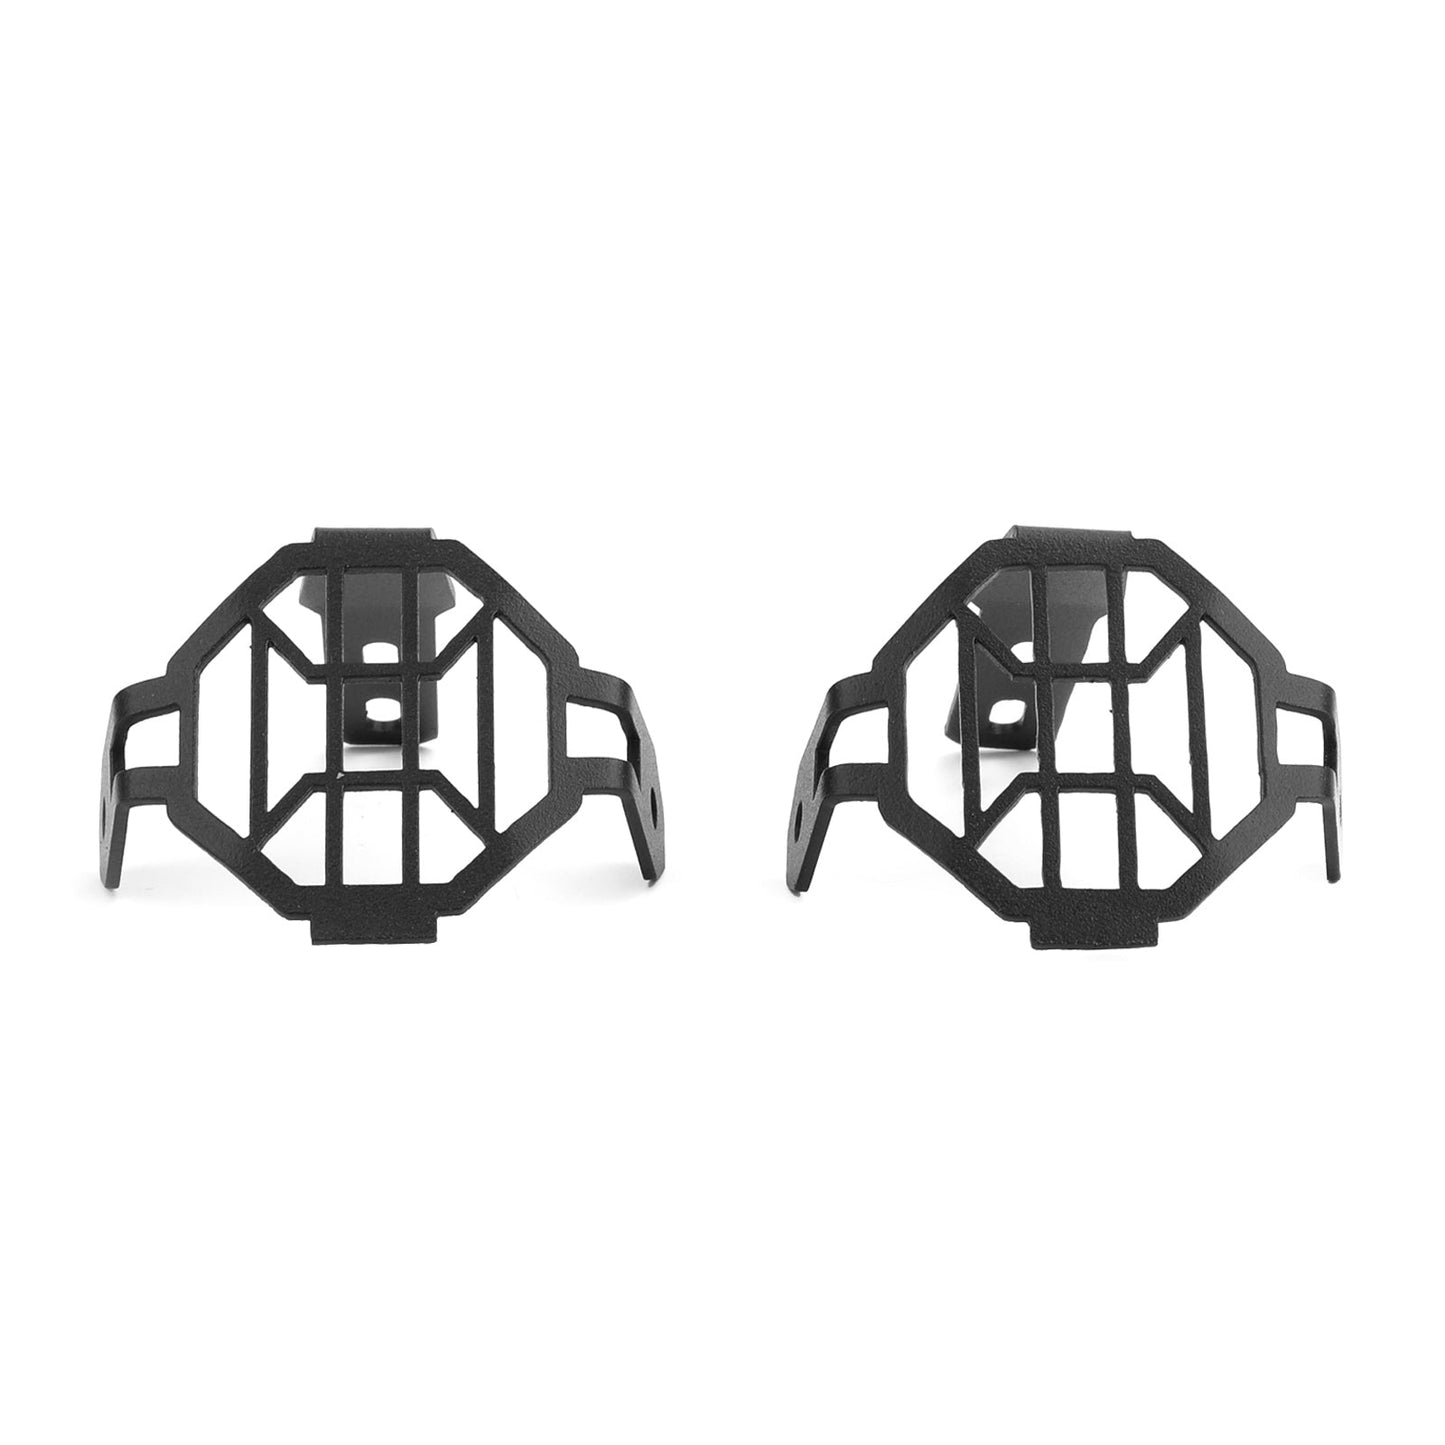 Fog spot Light Protector Guard Covers Fit For BMW R1200GS F800GS/ADV R1250GS U